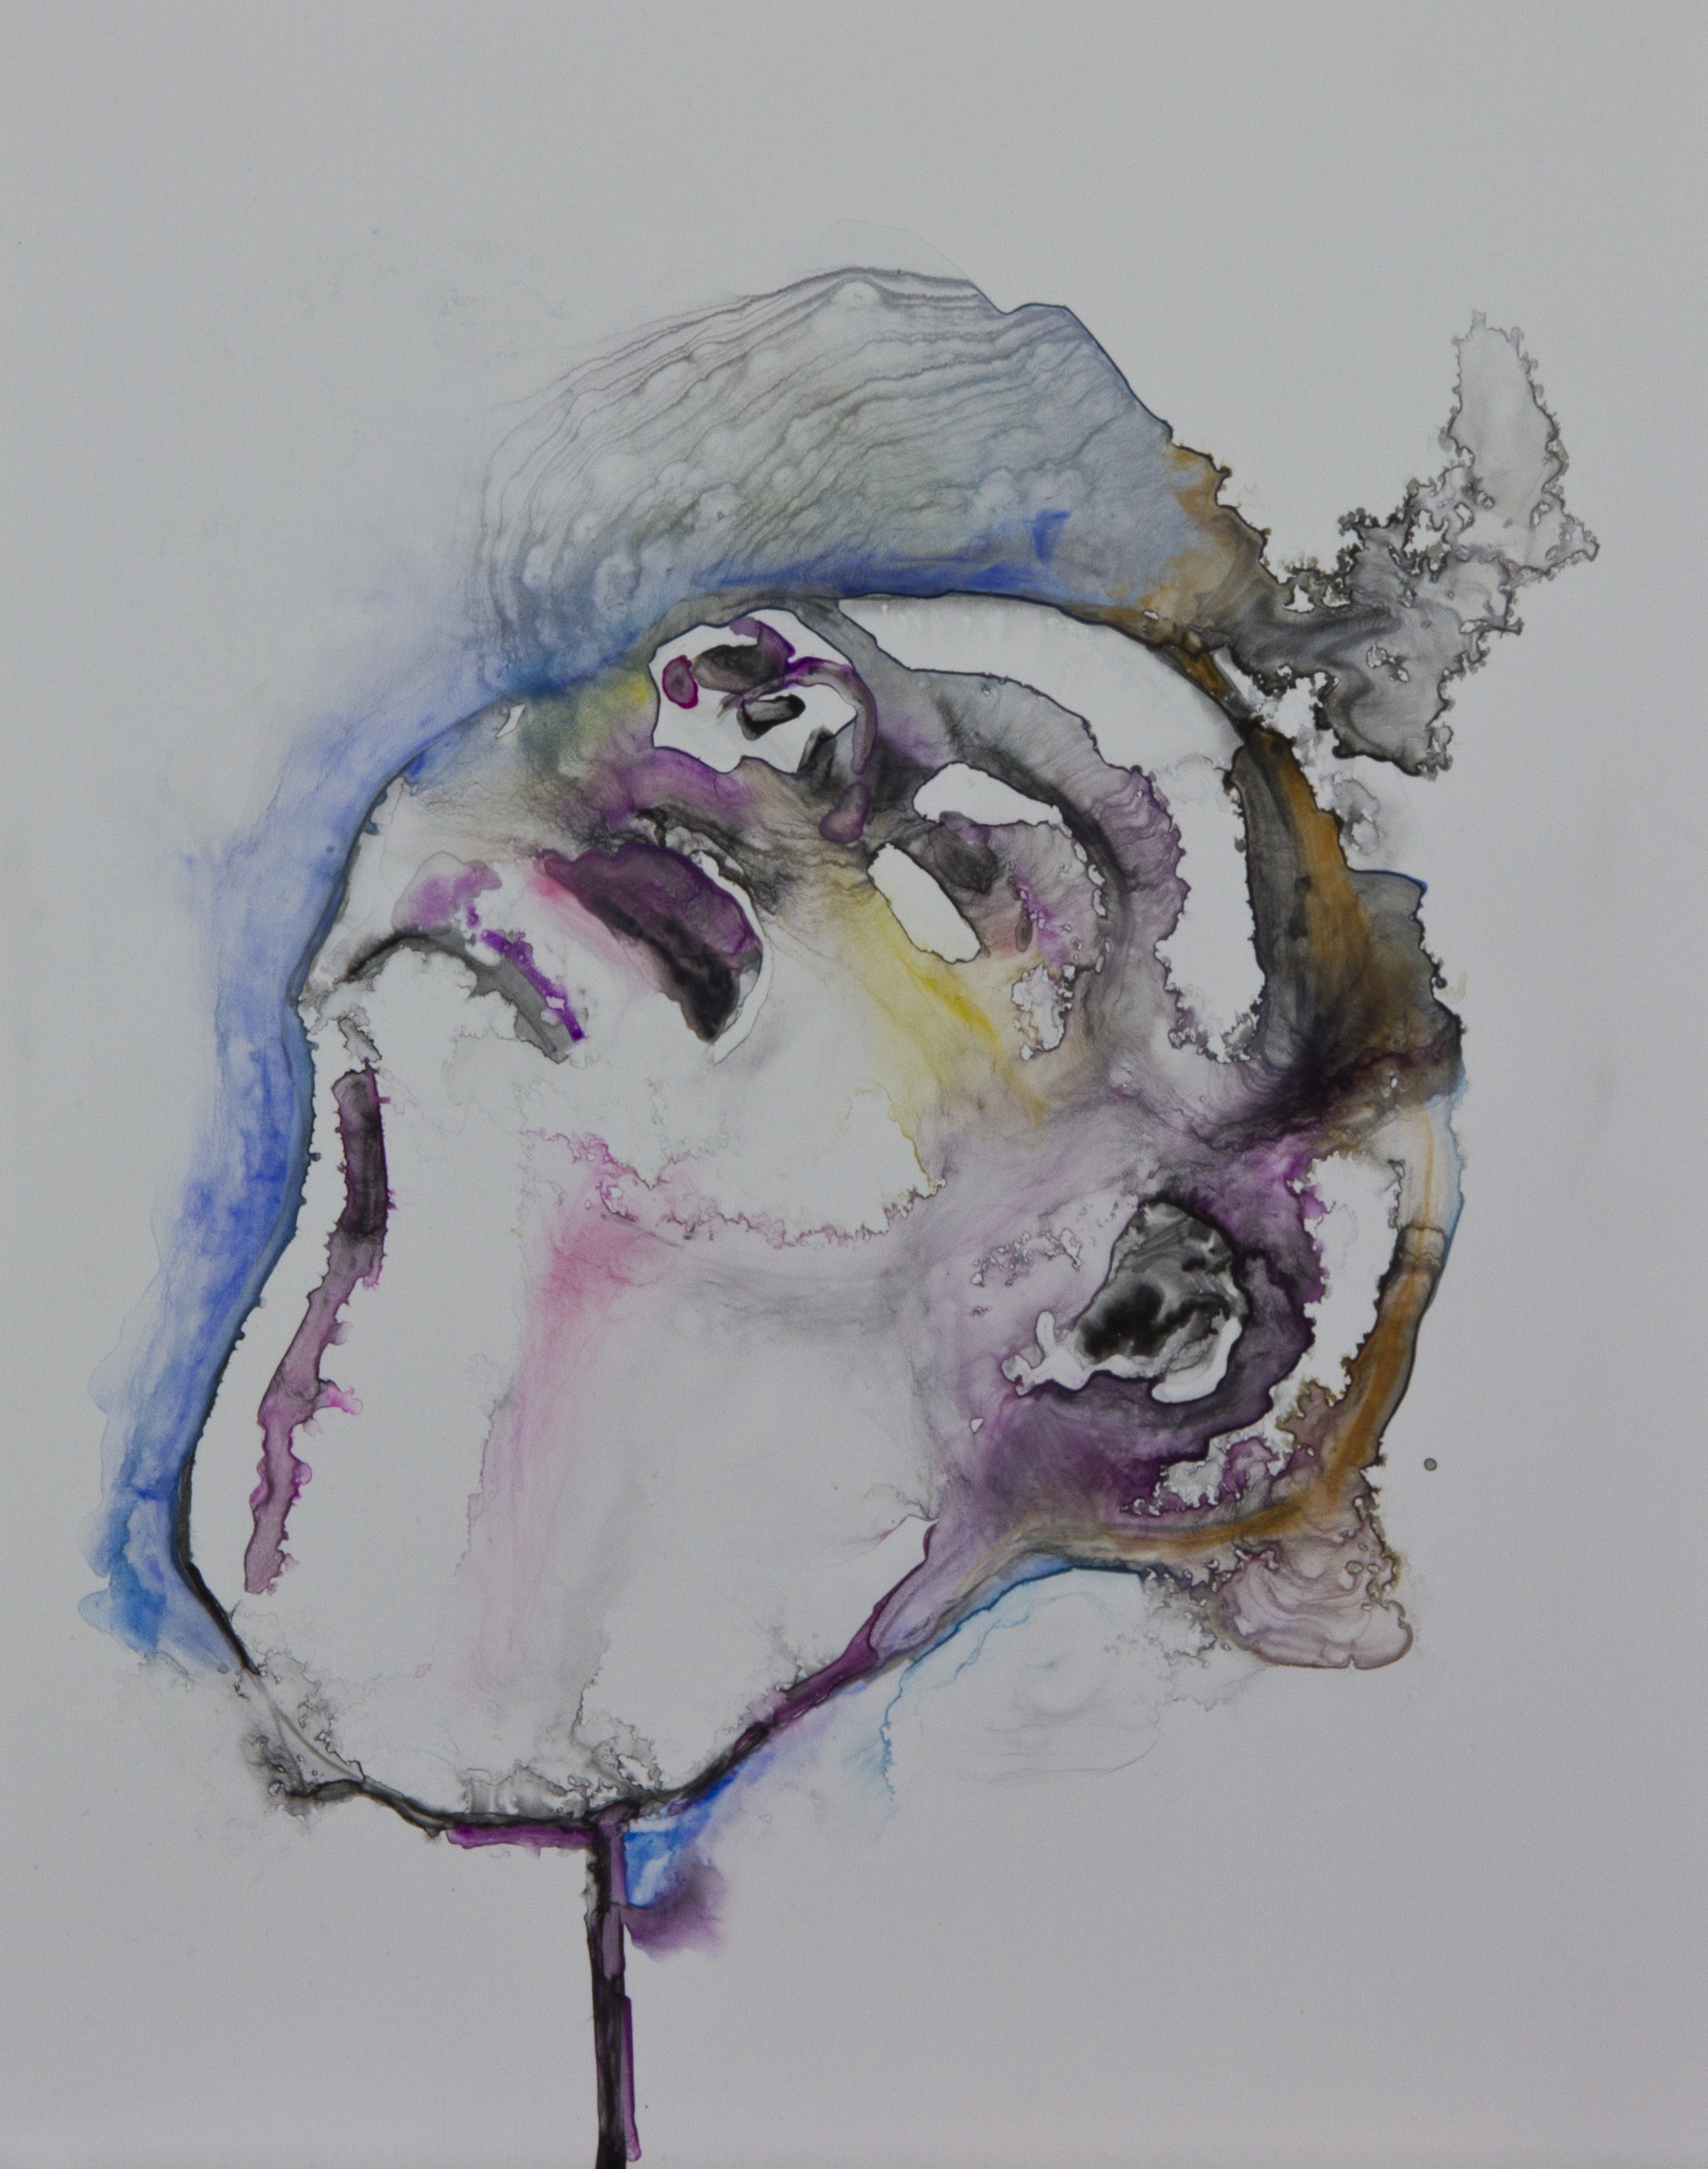 Specimen 2, 2011, watercolor on polypropylene, 11x14 inches